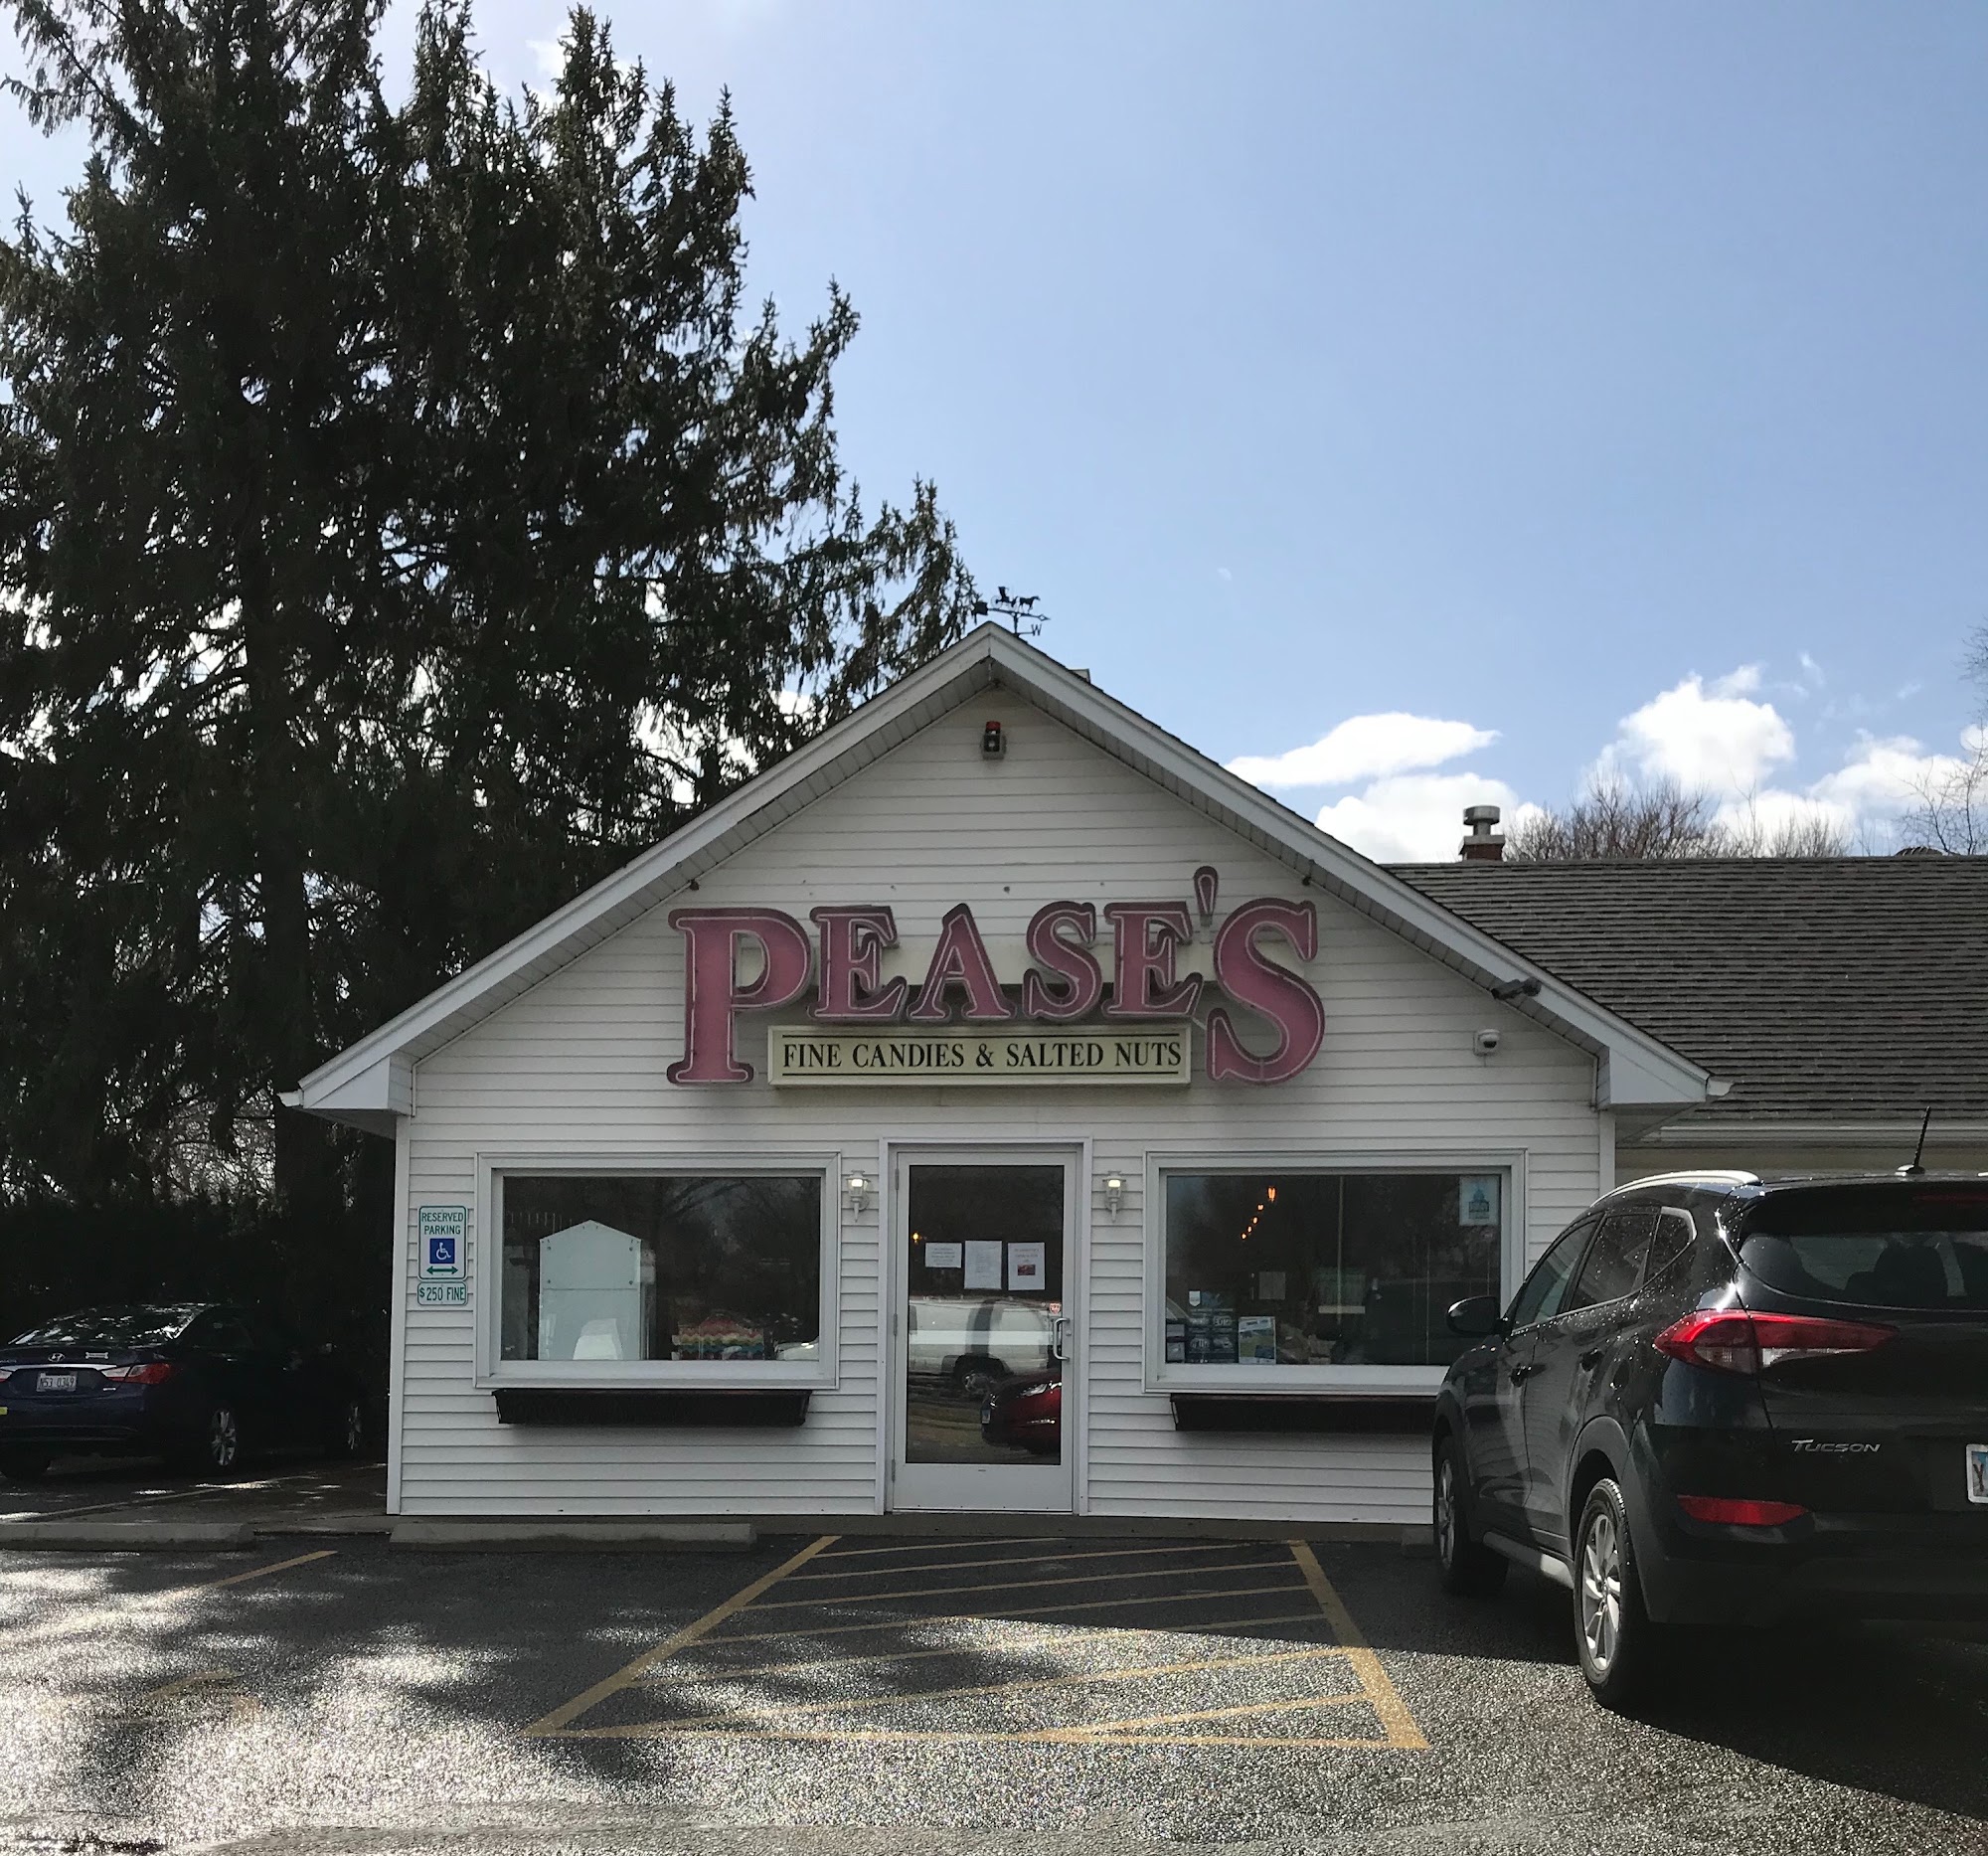 Pease's Candy